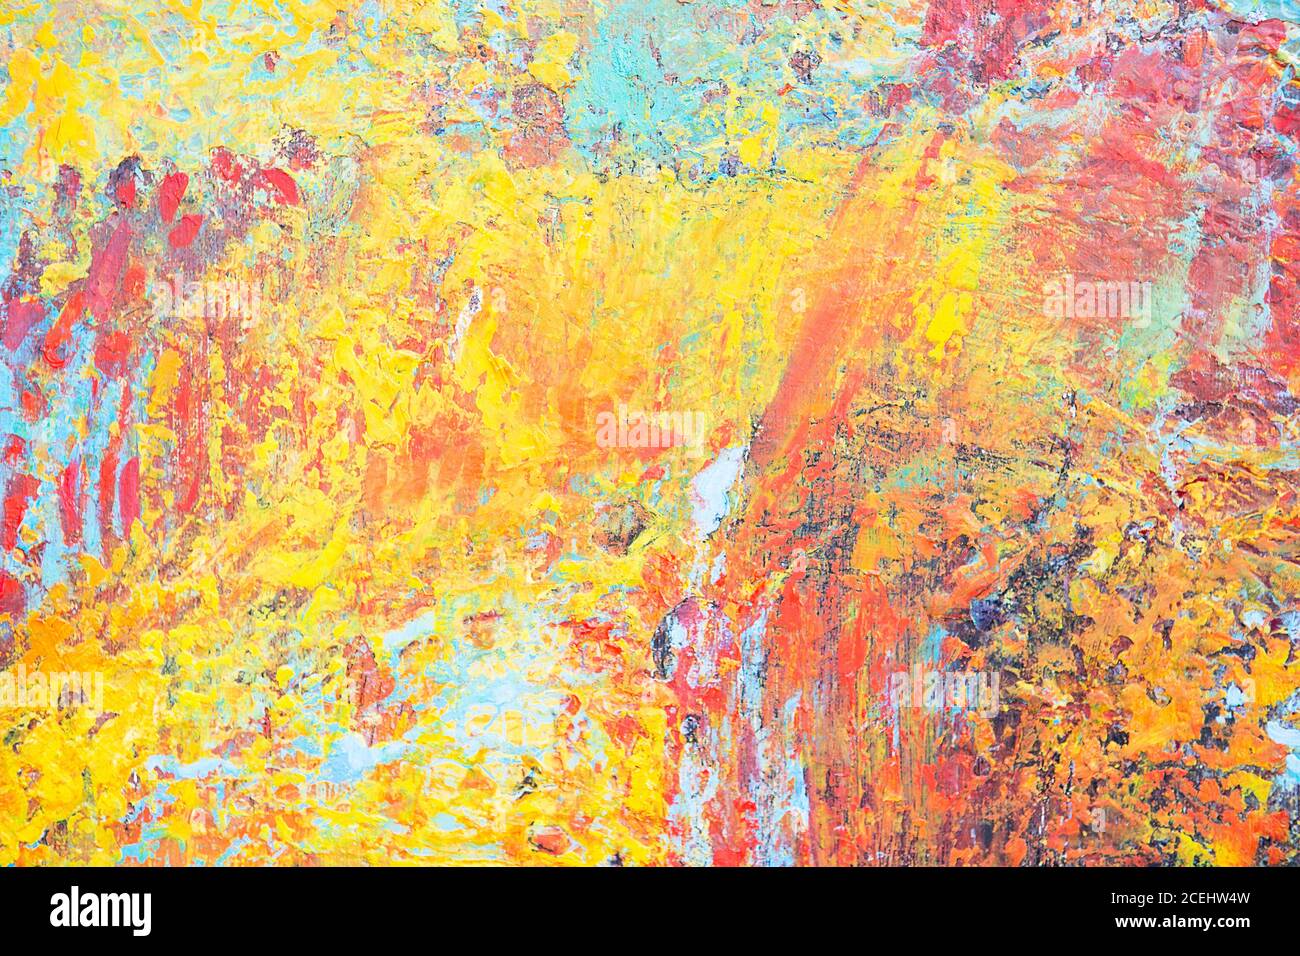 Abstract oil painting background. Oil on canvas. Hand drawn oil painting.  Color texture. Brushstrokes of paint. Modern art. Contemporary art. Colorful  Stock Photo - Alamy